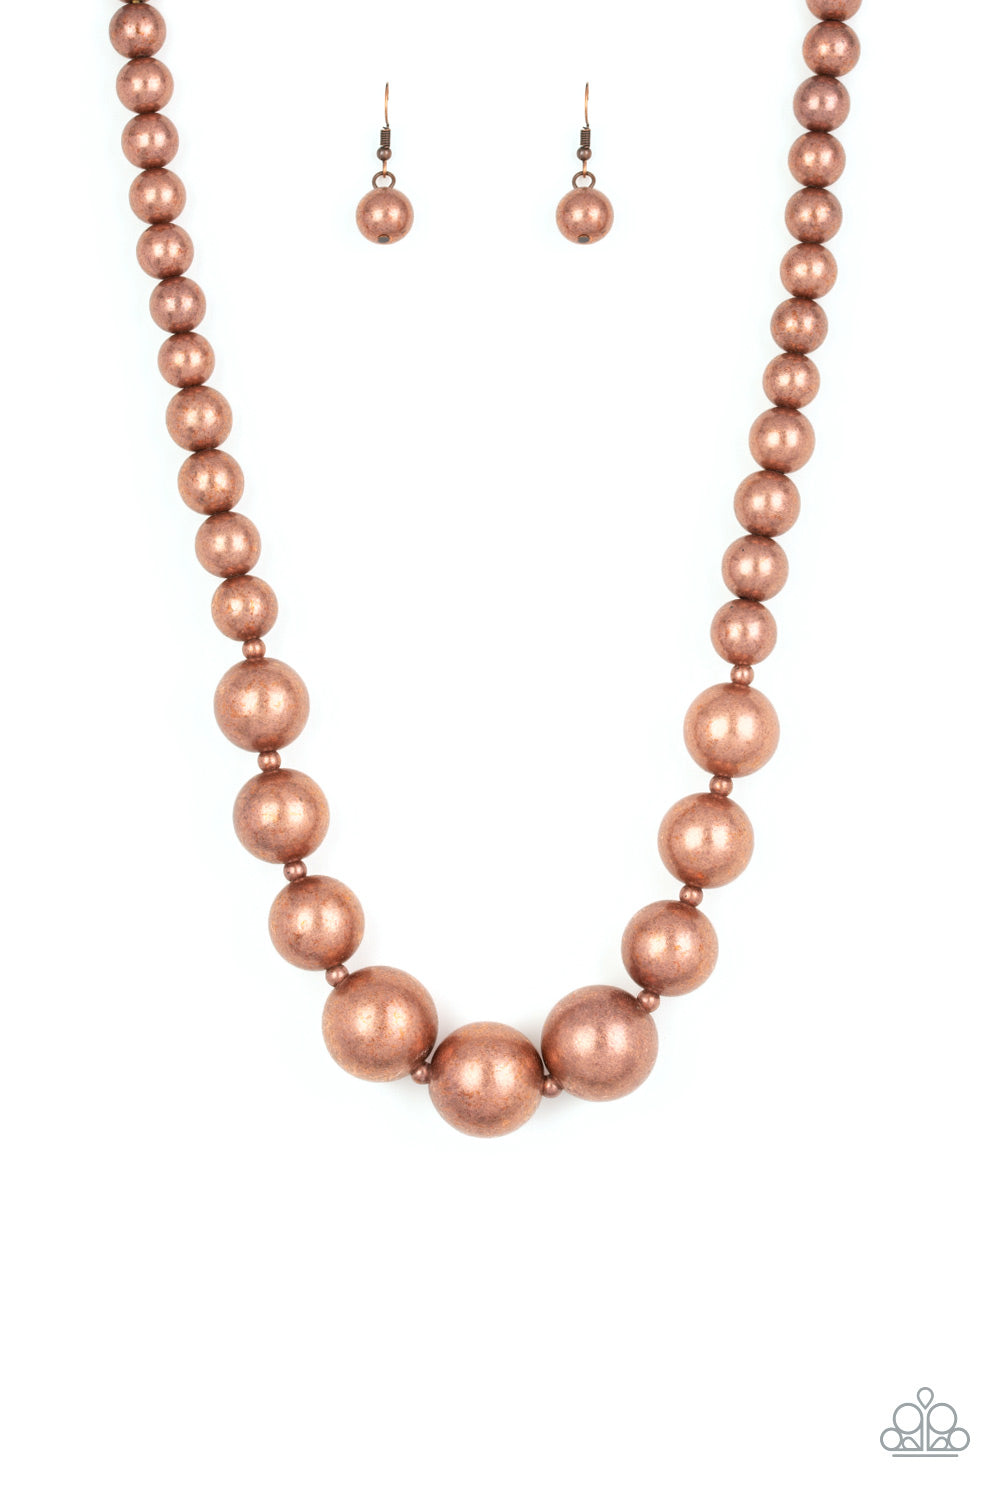 Paparazzi Accessories Living Up to Reputation - Copper Necklaces - Lady T Accessories